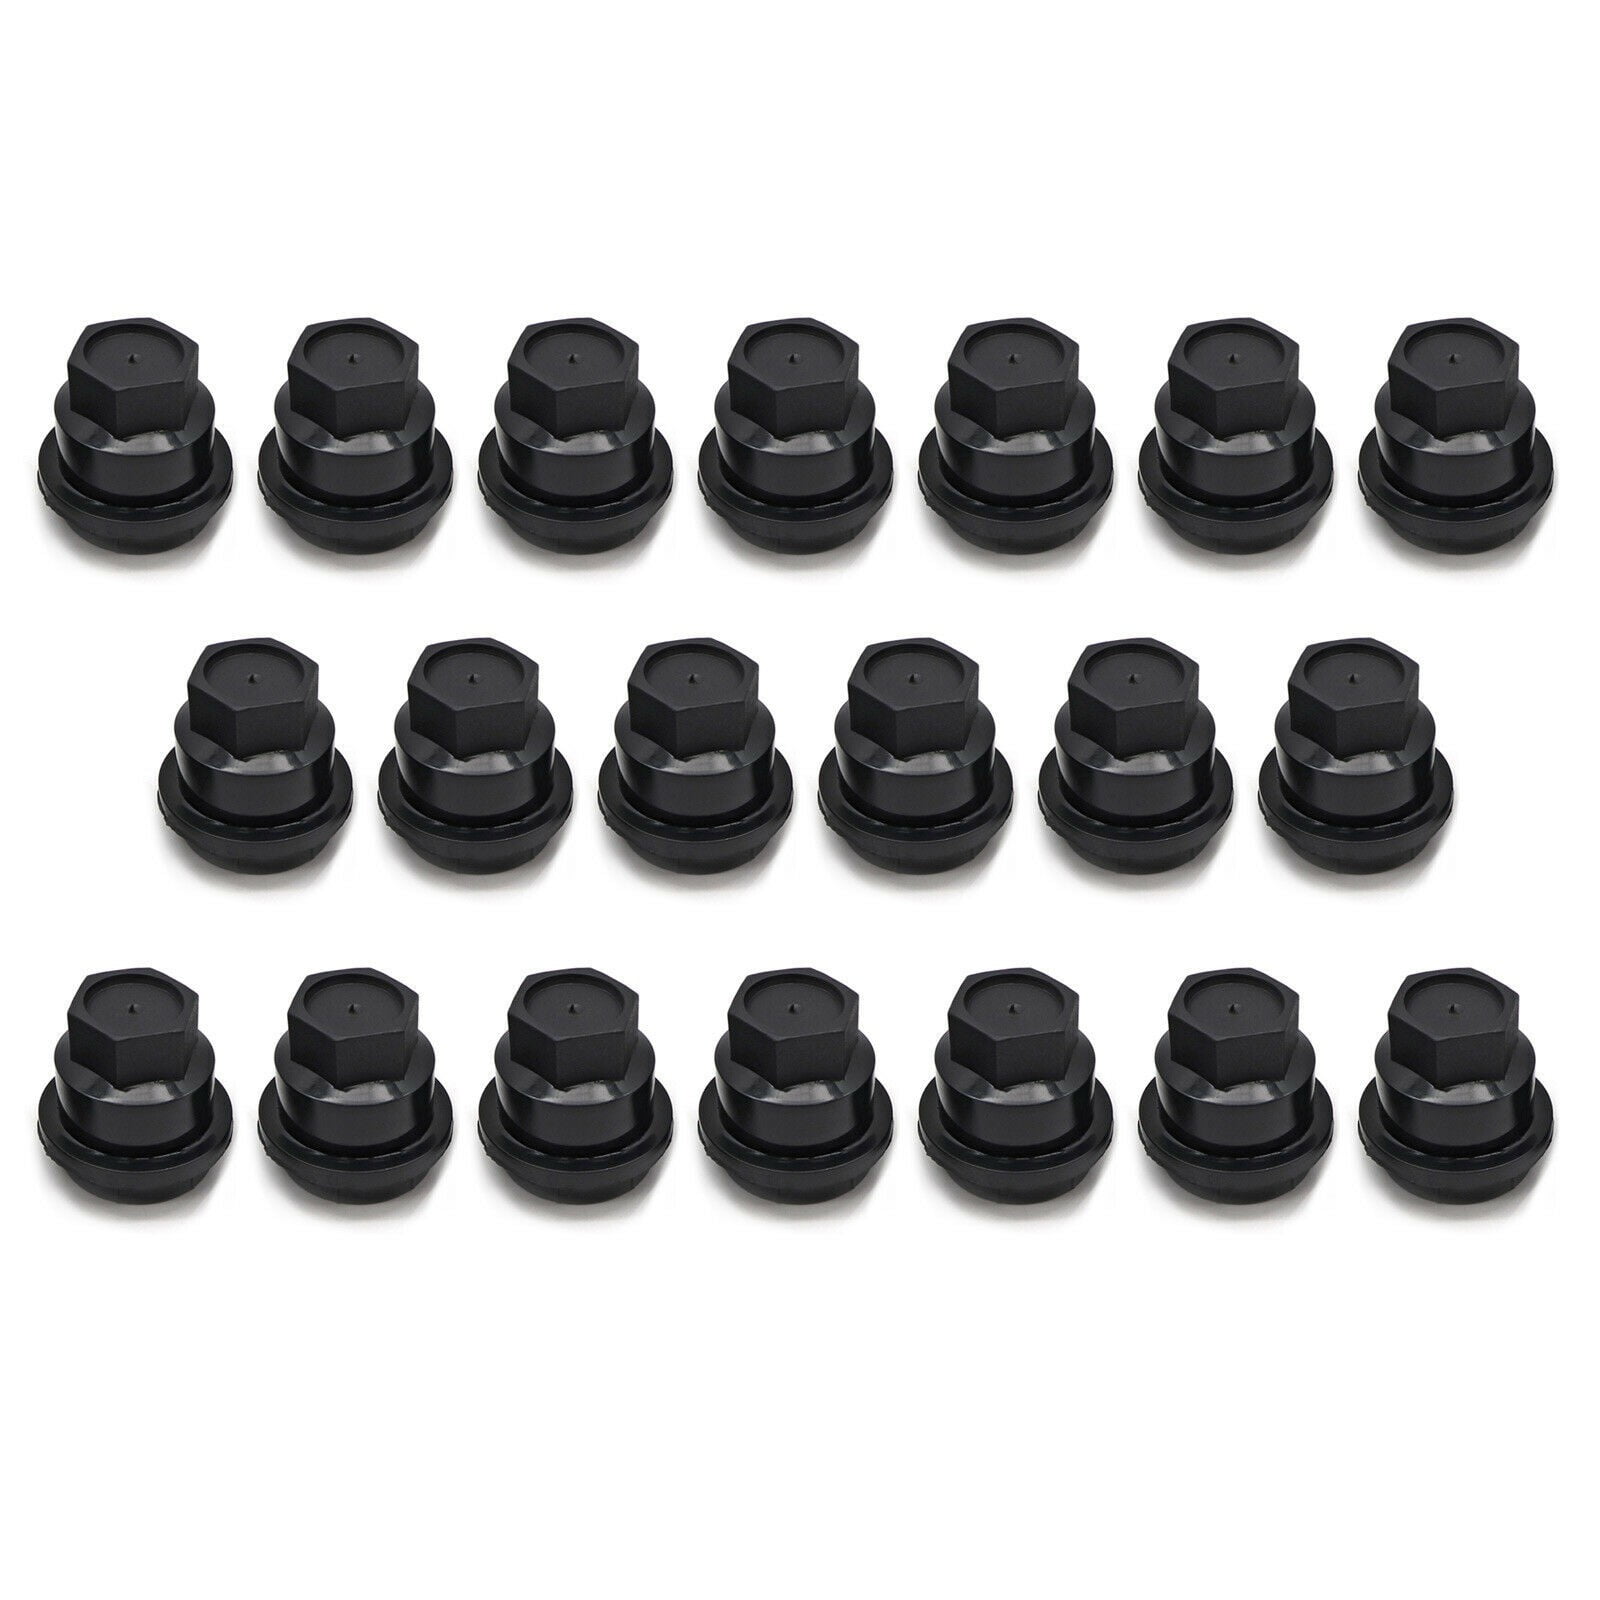 20 Pack Black Lug Nut Covers Cap for 1991-94 Chevy Blazer S10 